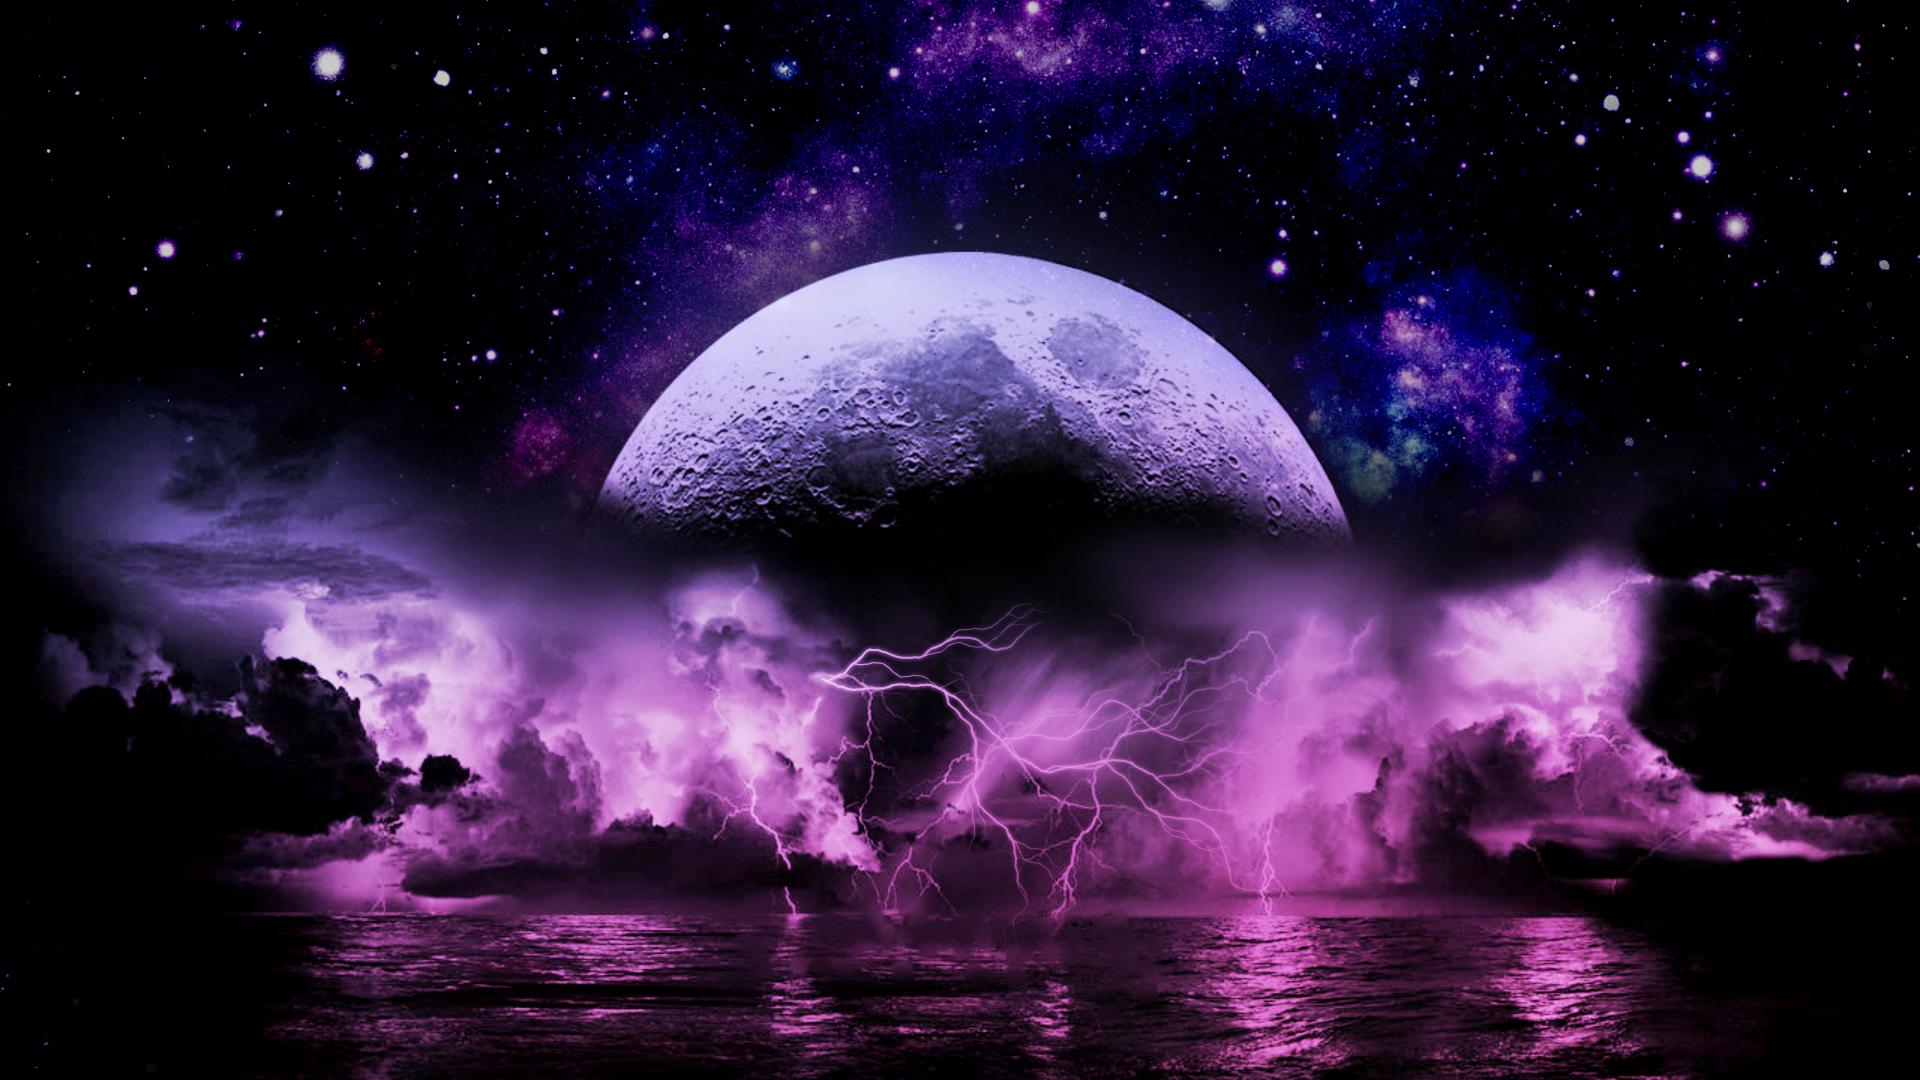 A purple and blue moon with lightning in the background - Lightning